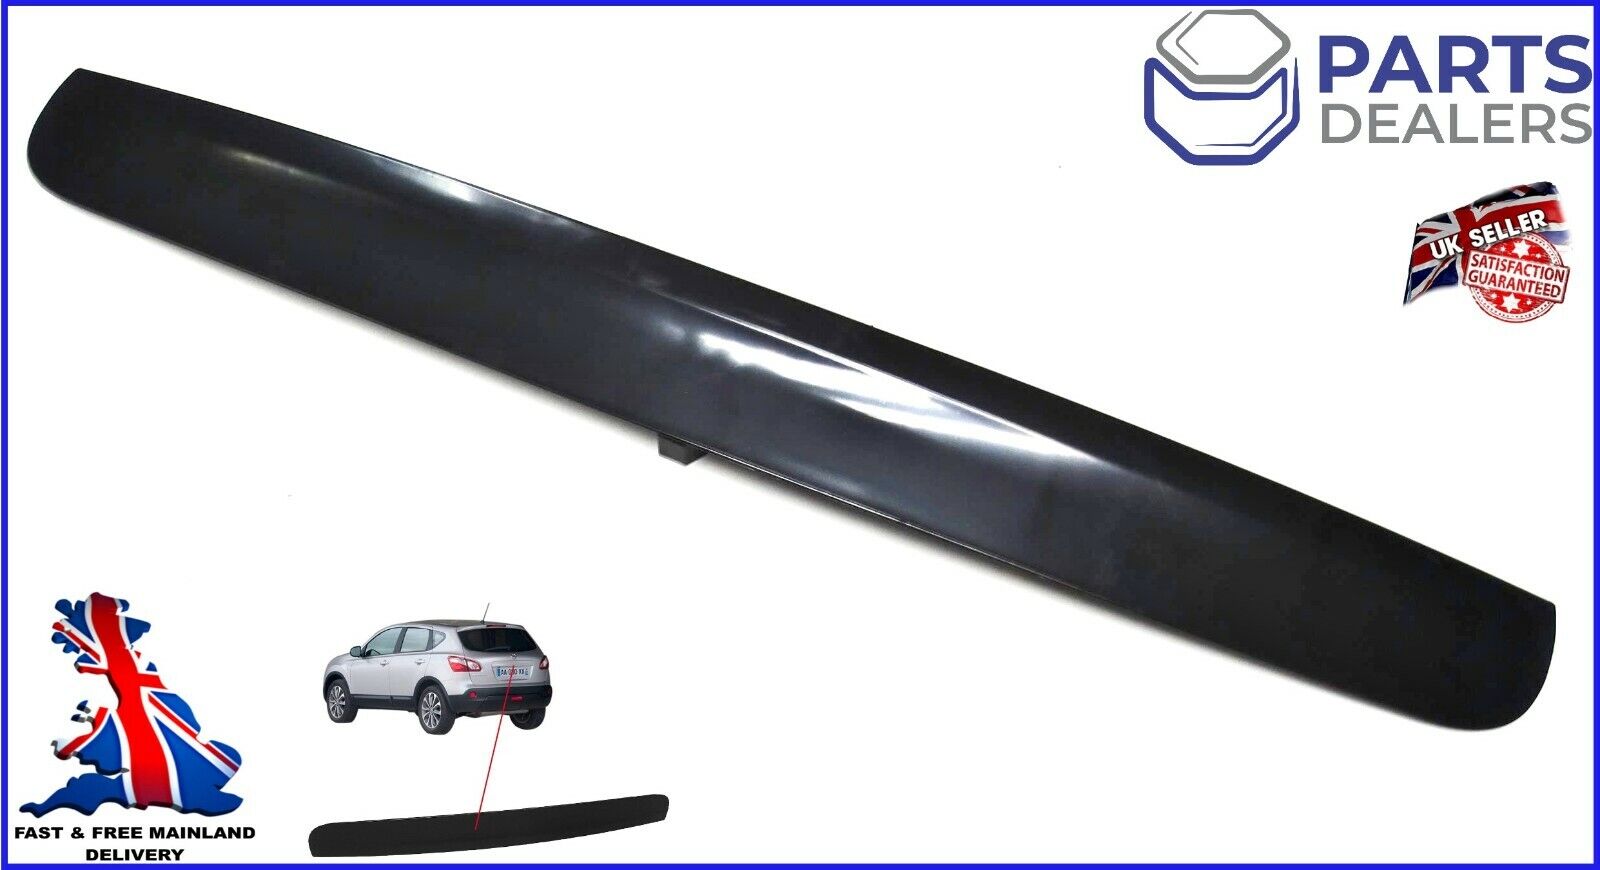 FOR NISSAN QASHQAI REAR TAILGATE BOOT LID HANDLE COVER TRIM 2007